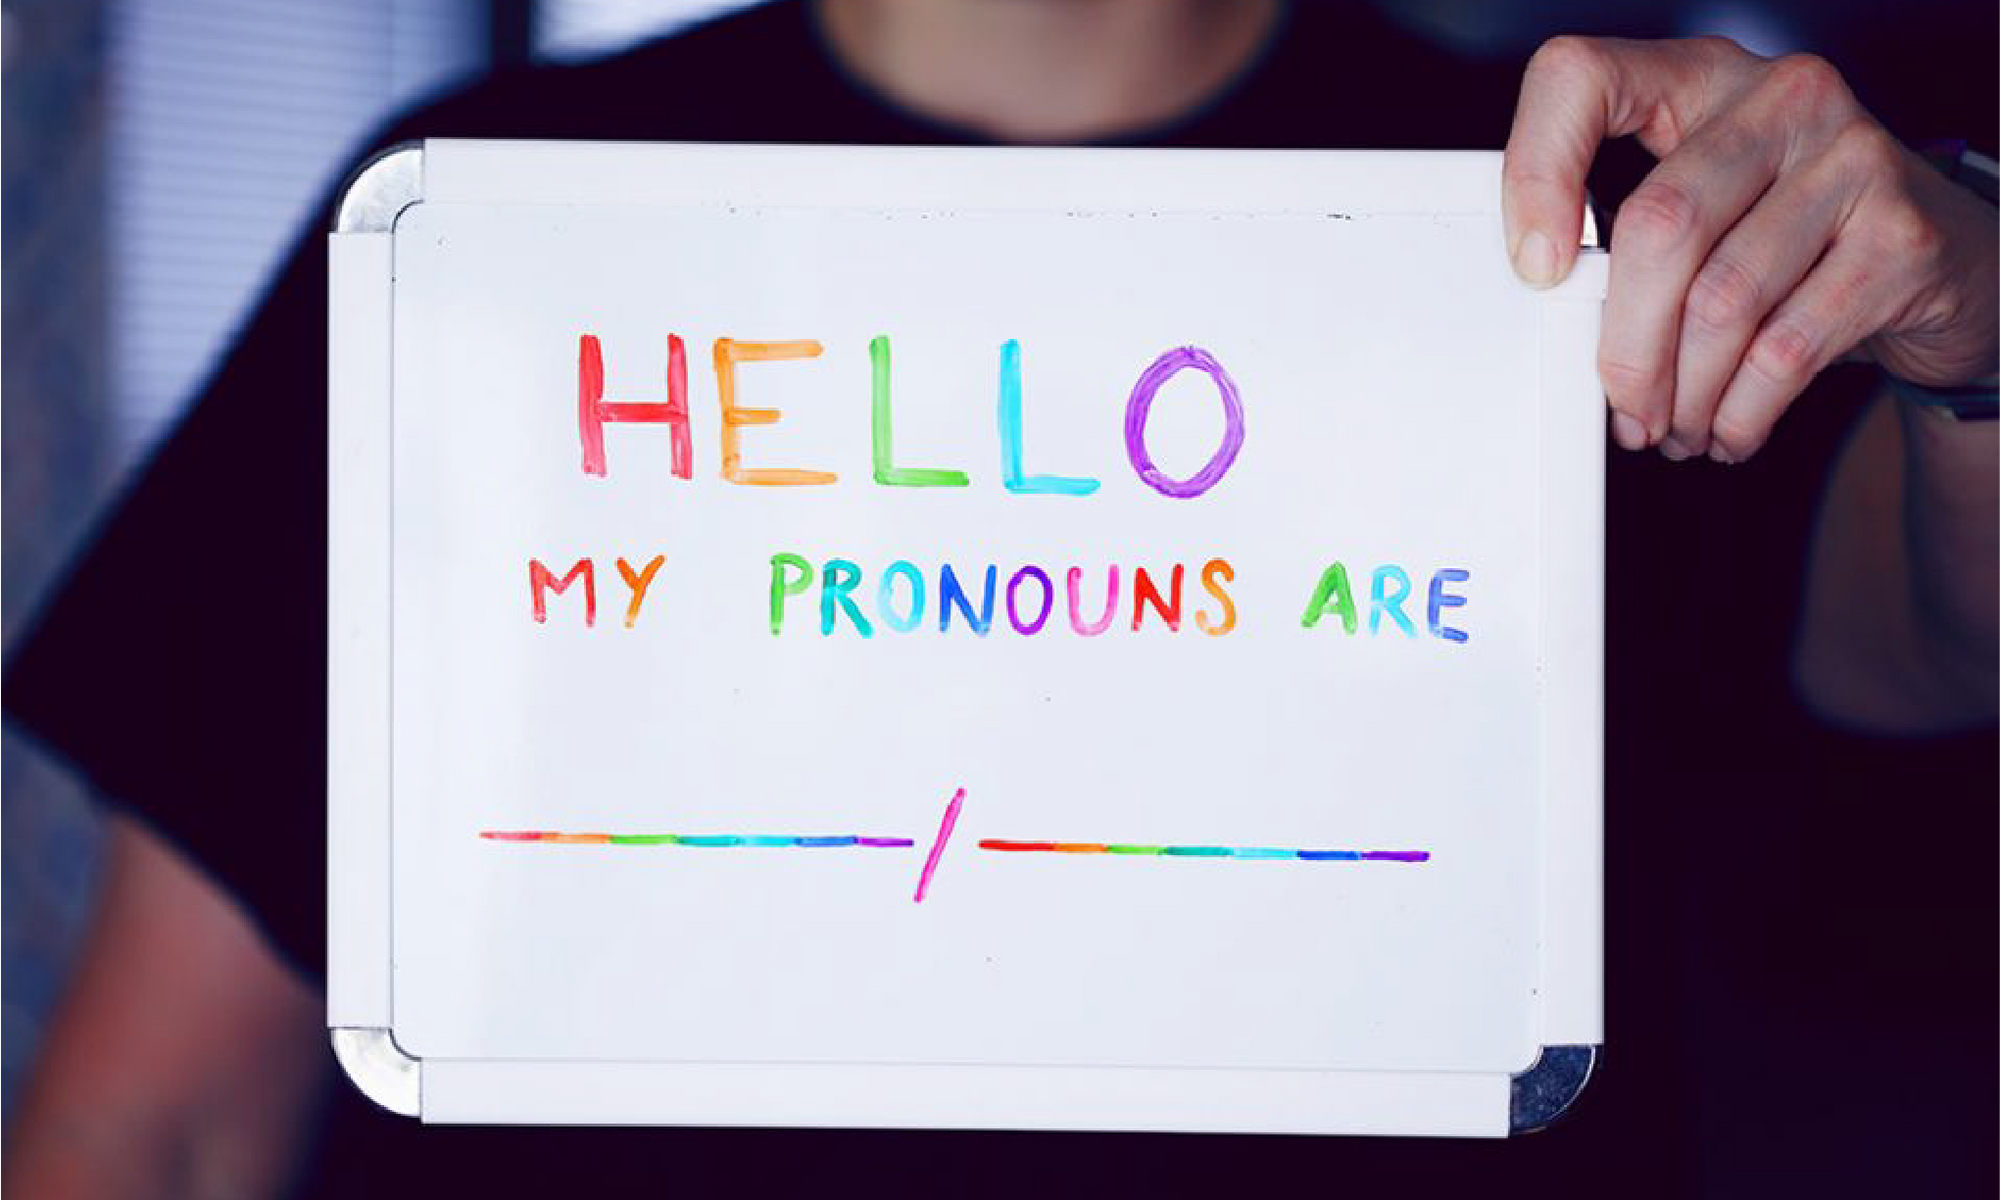 Why now? Why these pronouns?